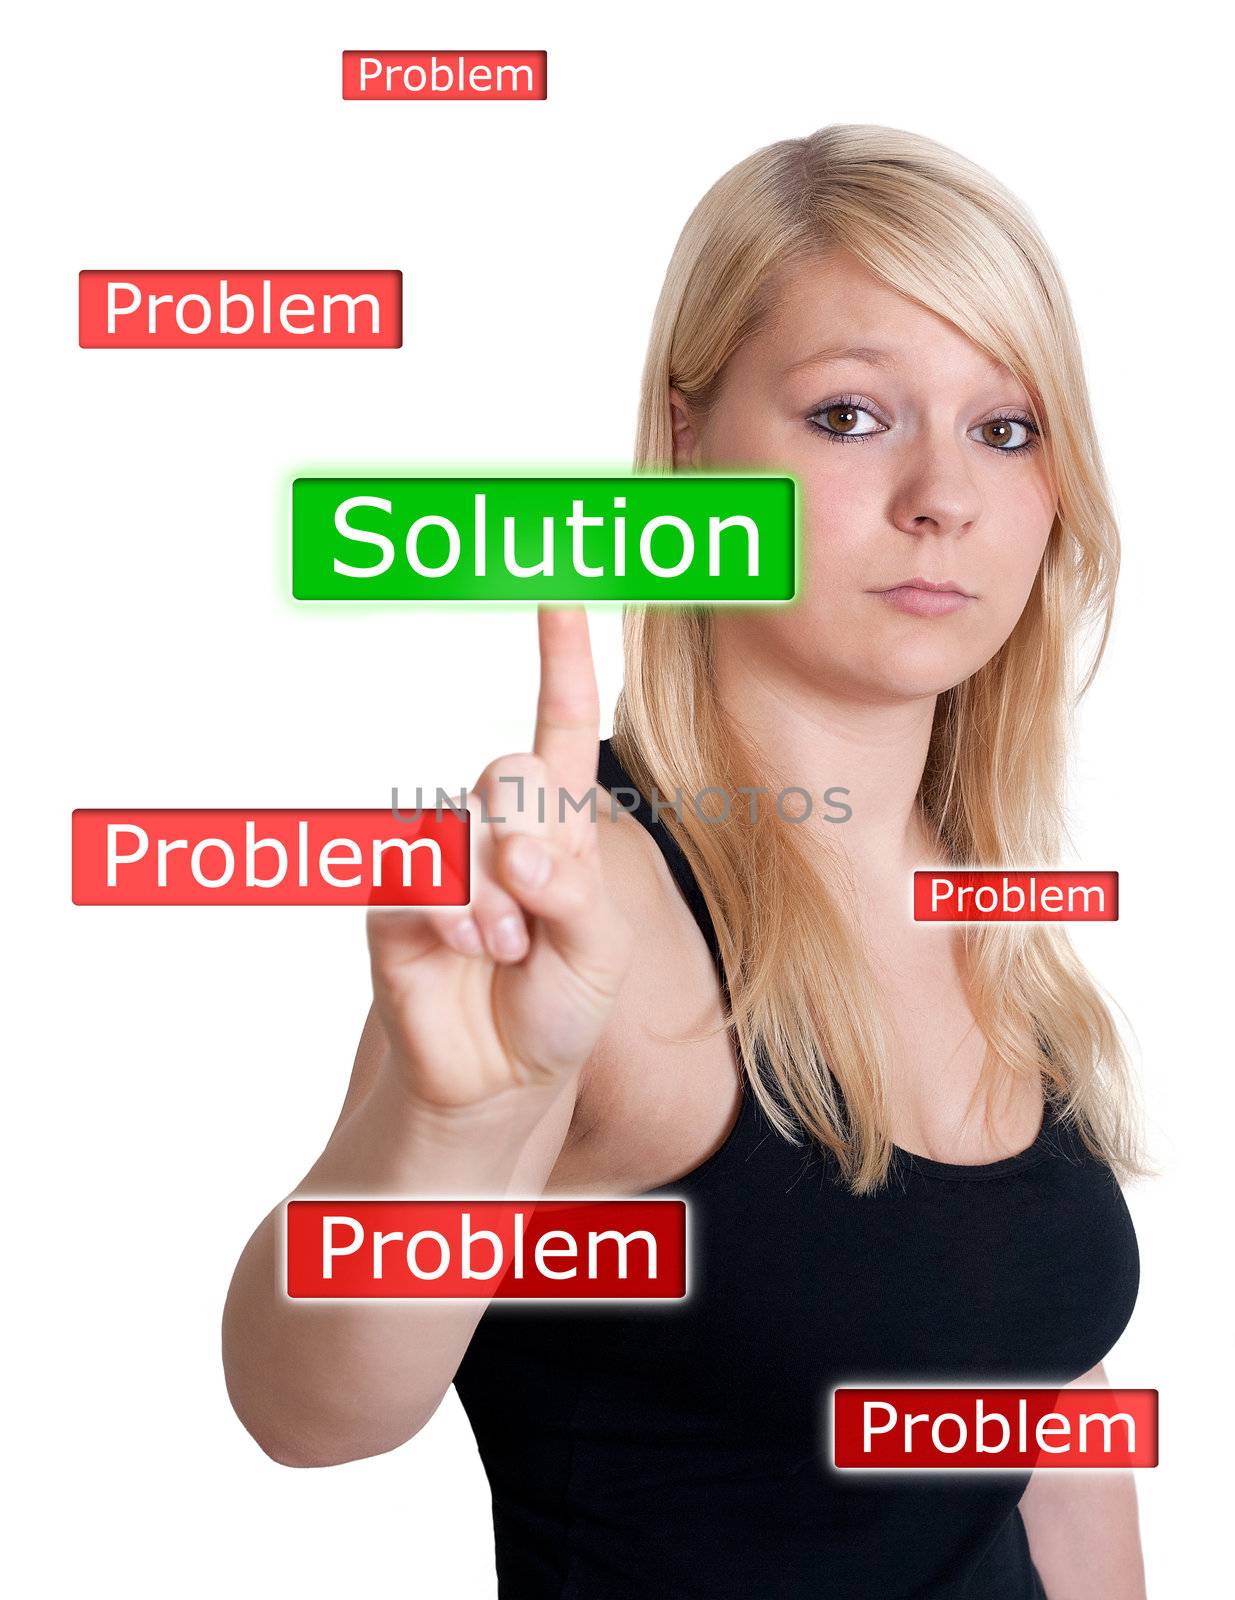 woman pressing solution button on white background